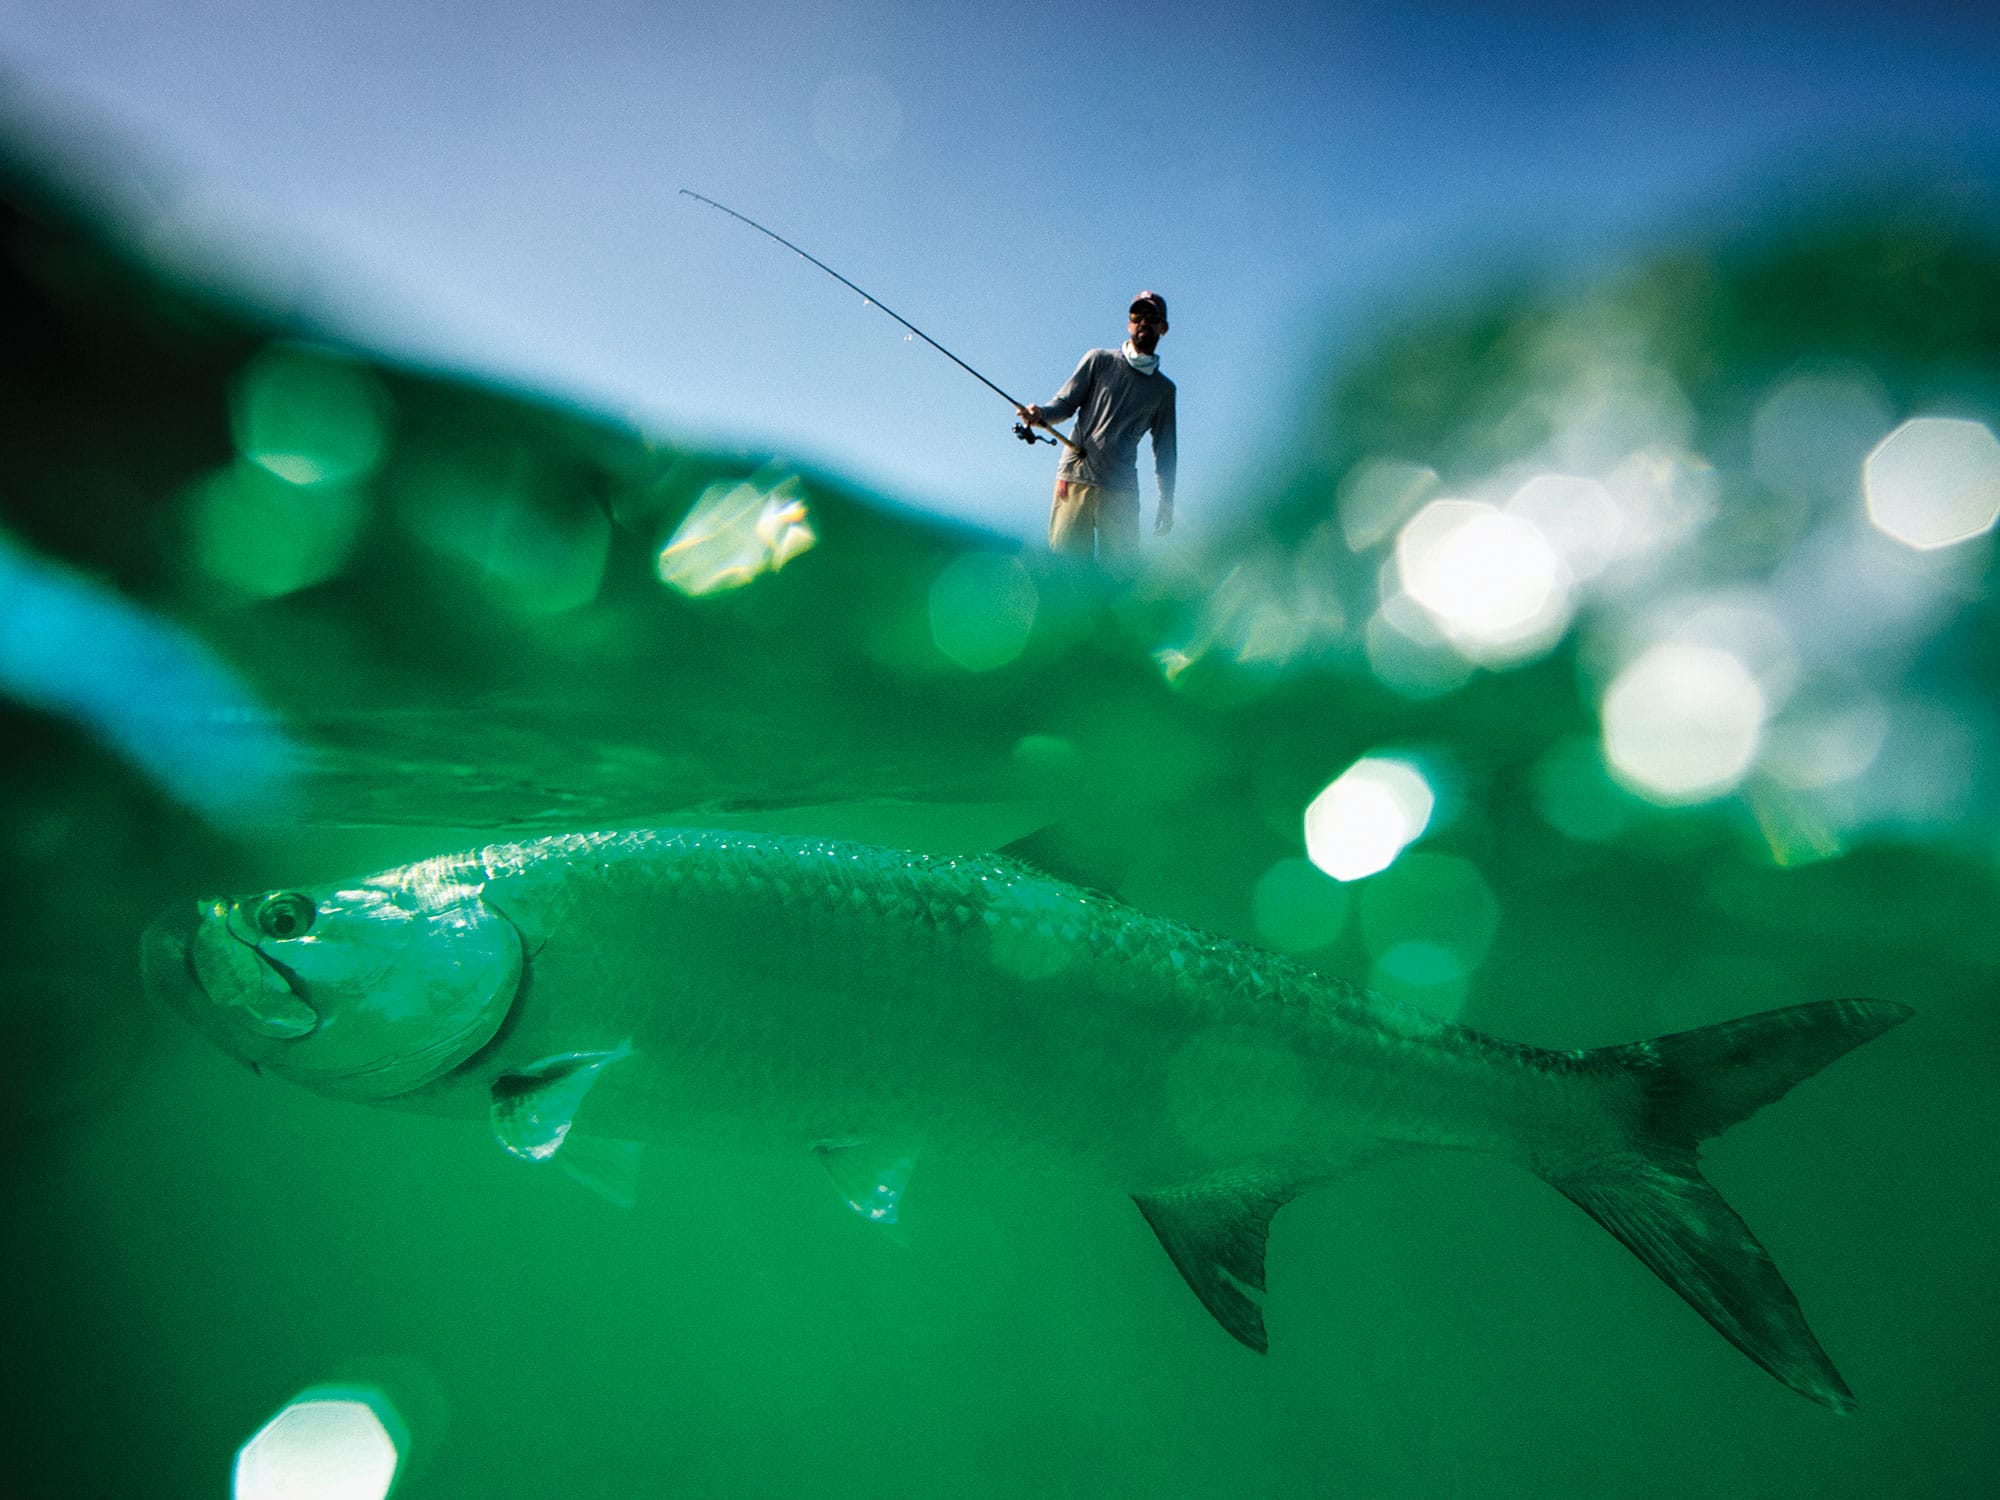 Split-image showing half underwater view of a tarpon hooked on a fishing line, while an angler reels it in during a tarpon fishing charter. Above water, the angler's action is visible as they work to land the tarpon.